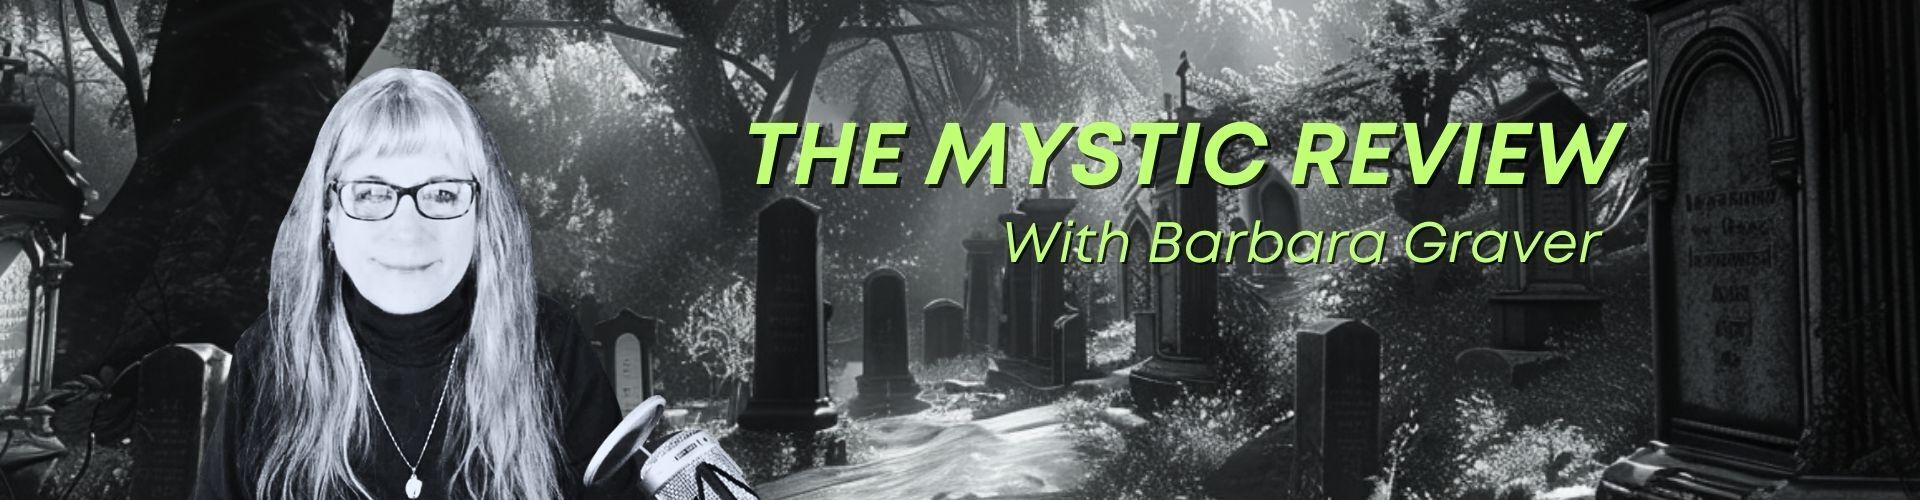 The Mystic Review